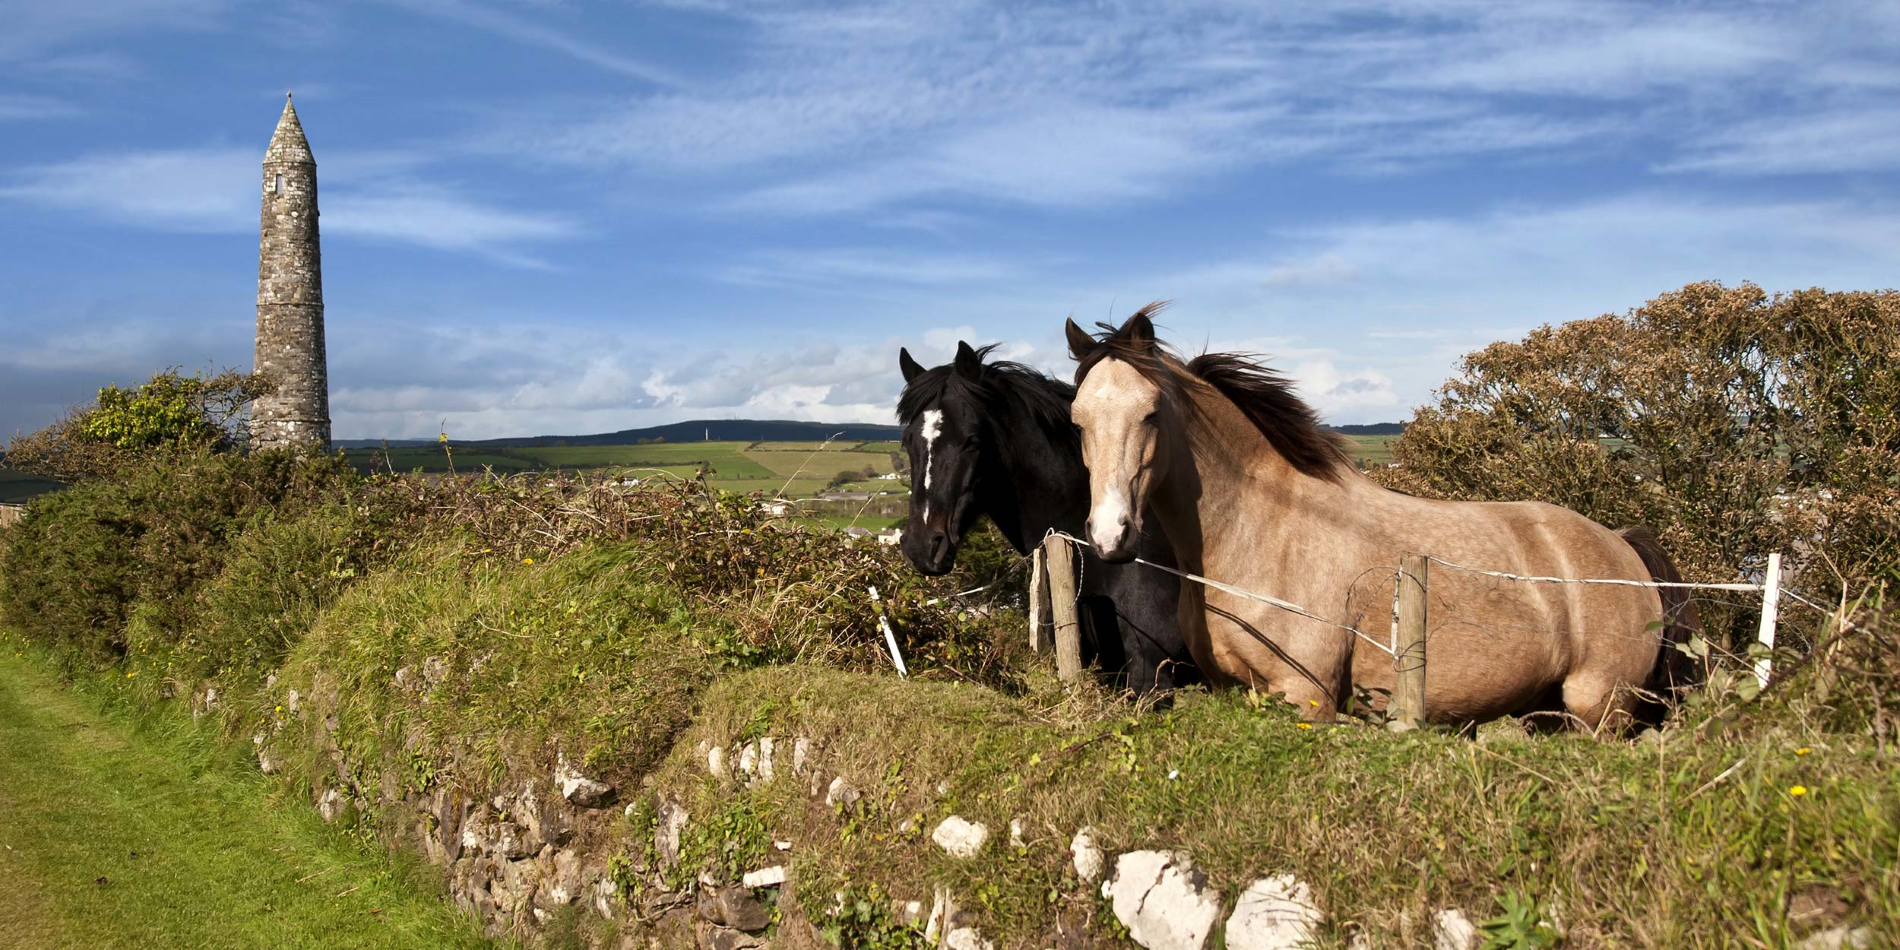 Two beautiful Irish horses in front of an ancient round tower in the beautiful Ardmore countryside of county Waterford in Ireland